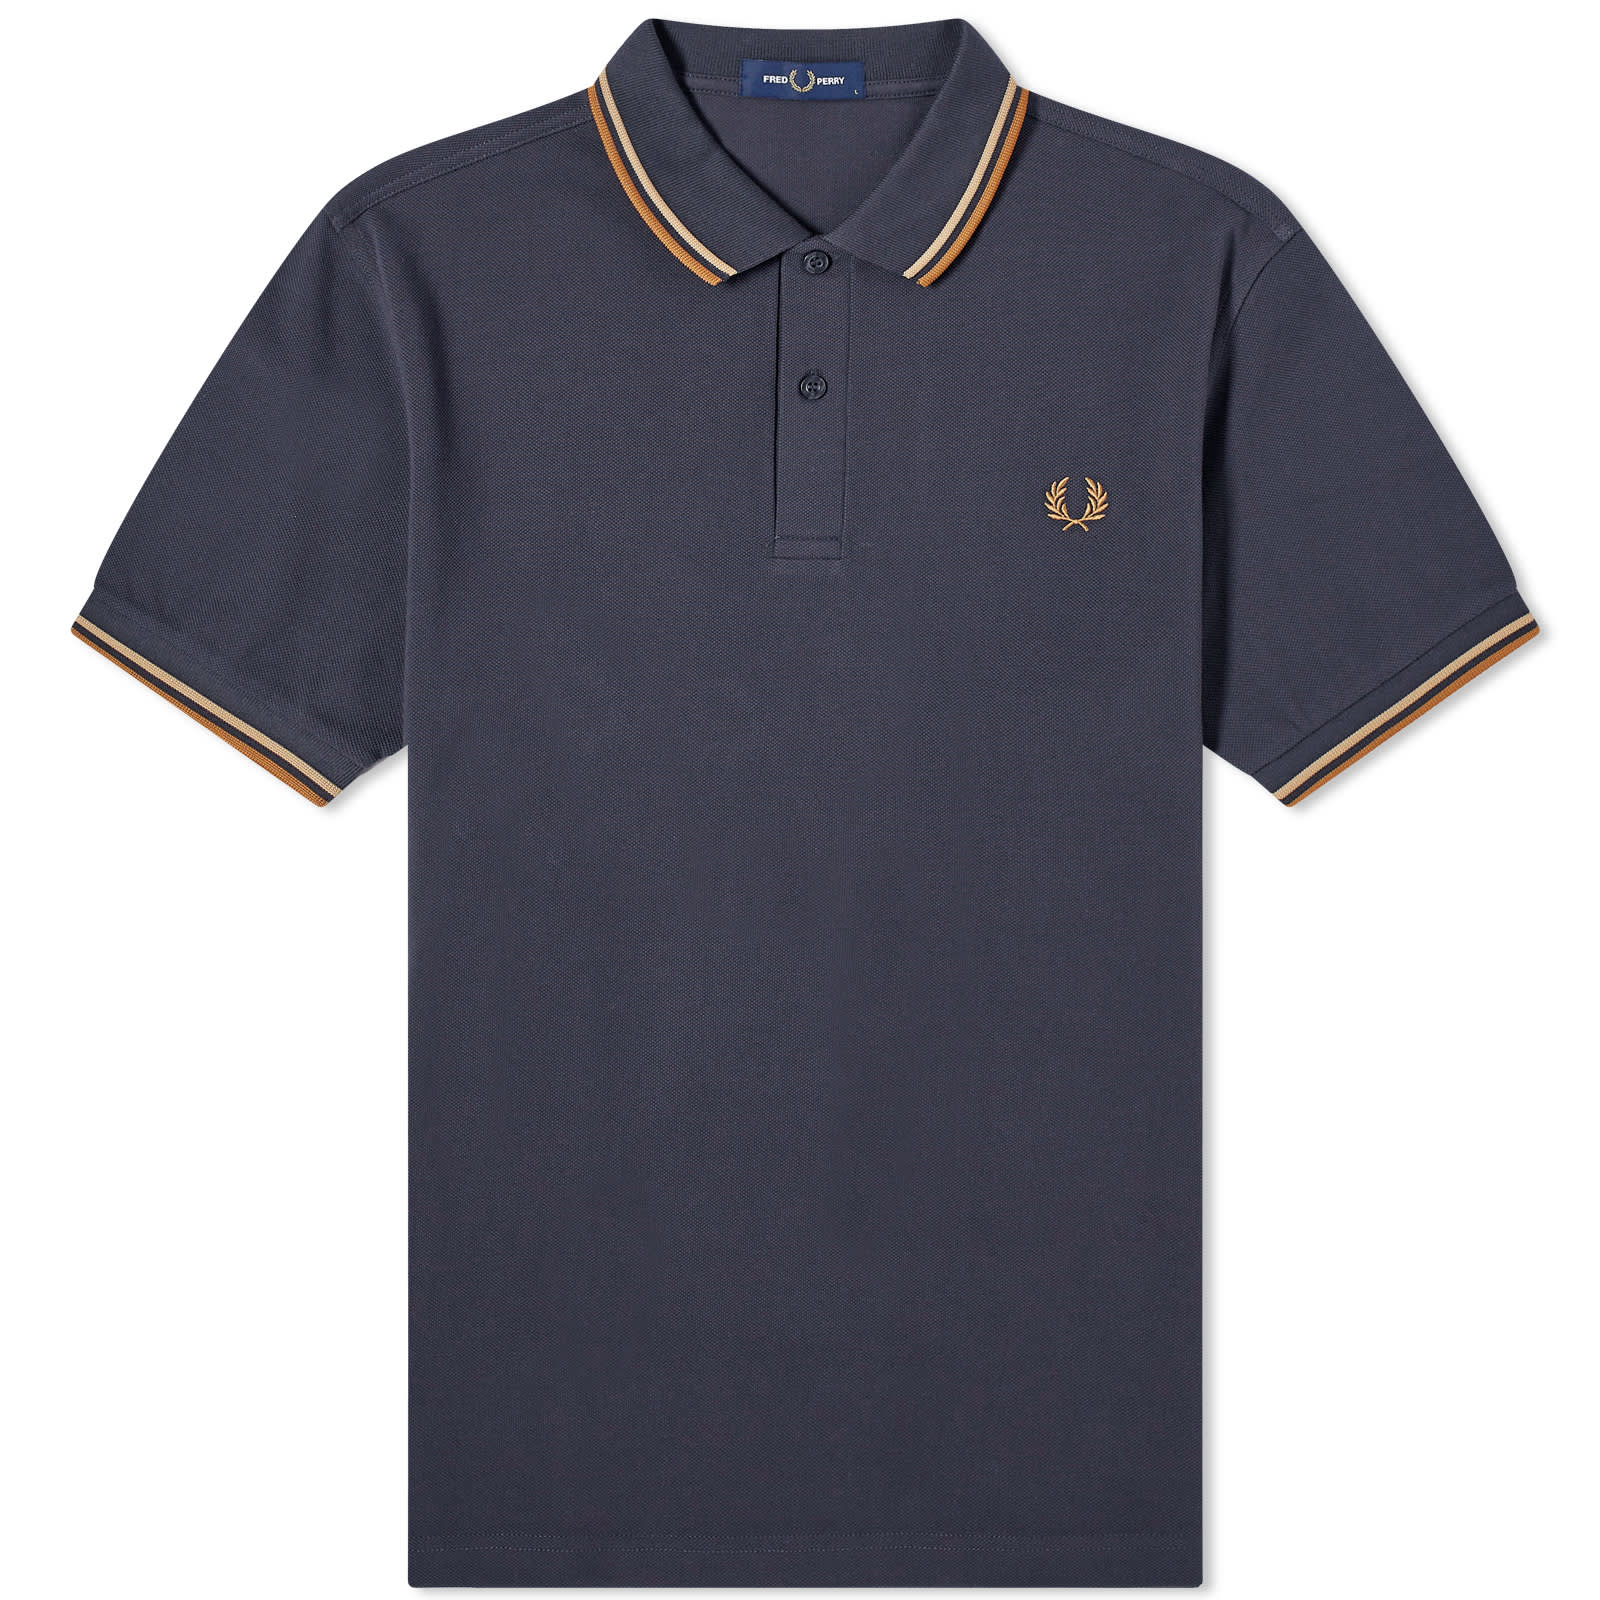 Поло Fred Perry Twin Tipped, цвет Grey, Stone & Caramel поло fred perry twin tipped цвет french navy